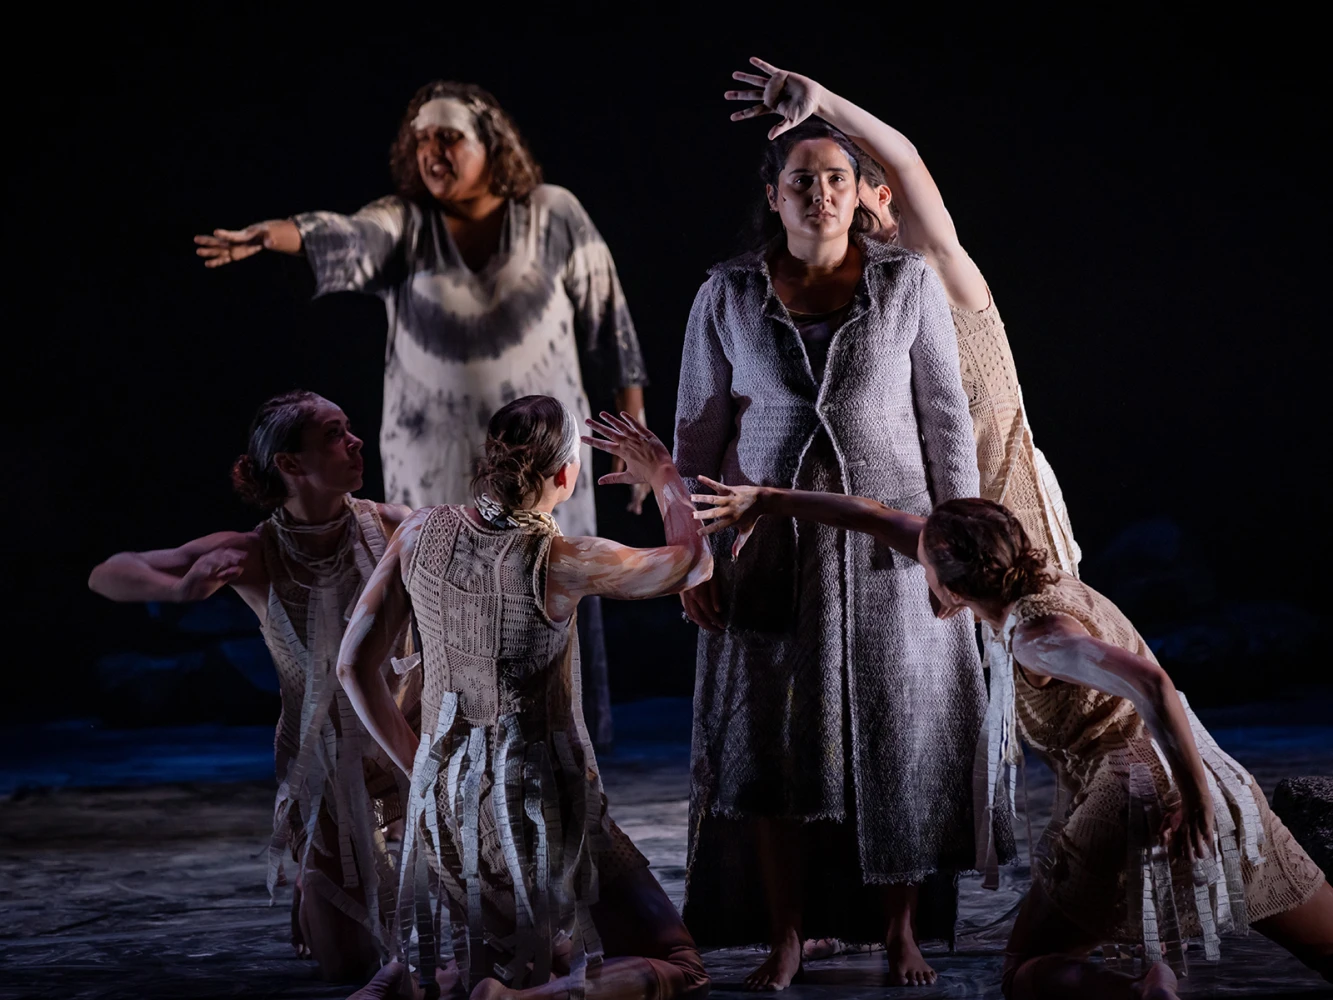 Wudjang: Not the Past presented by Bangarra Dance Theatre: What to expect - 5